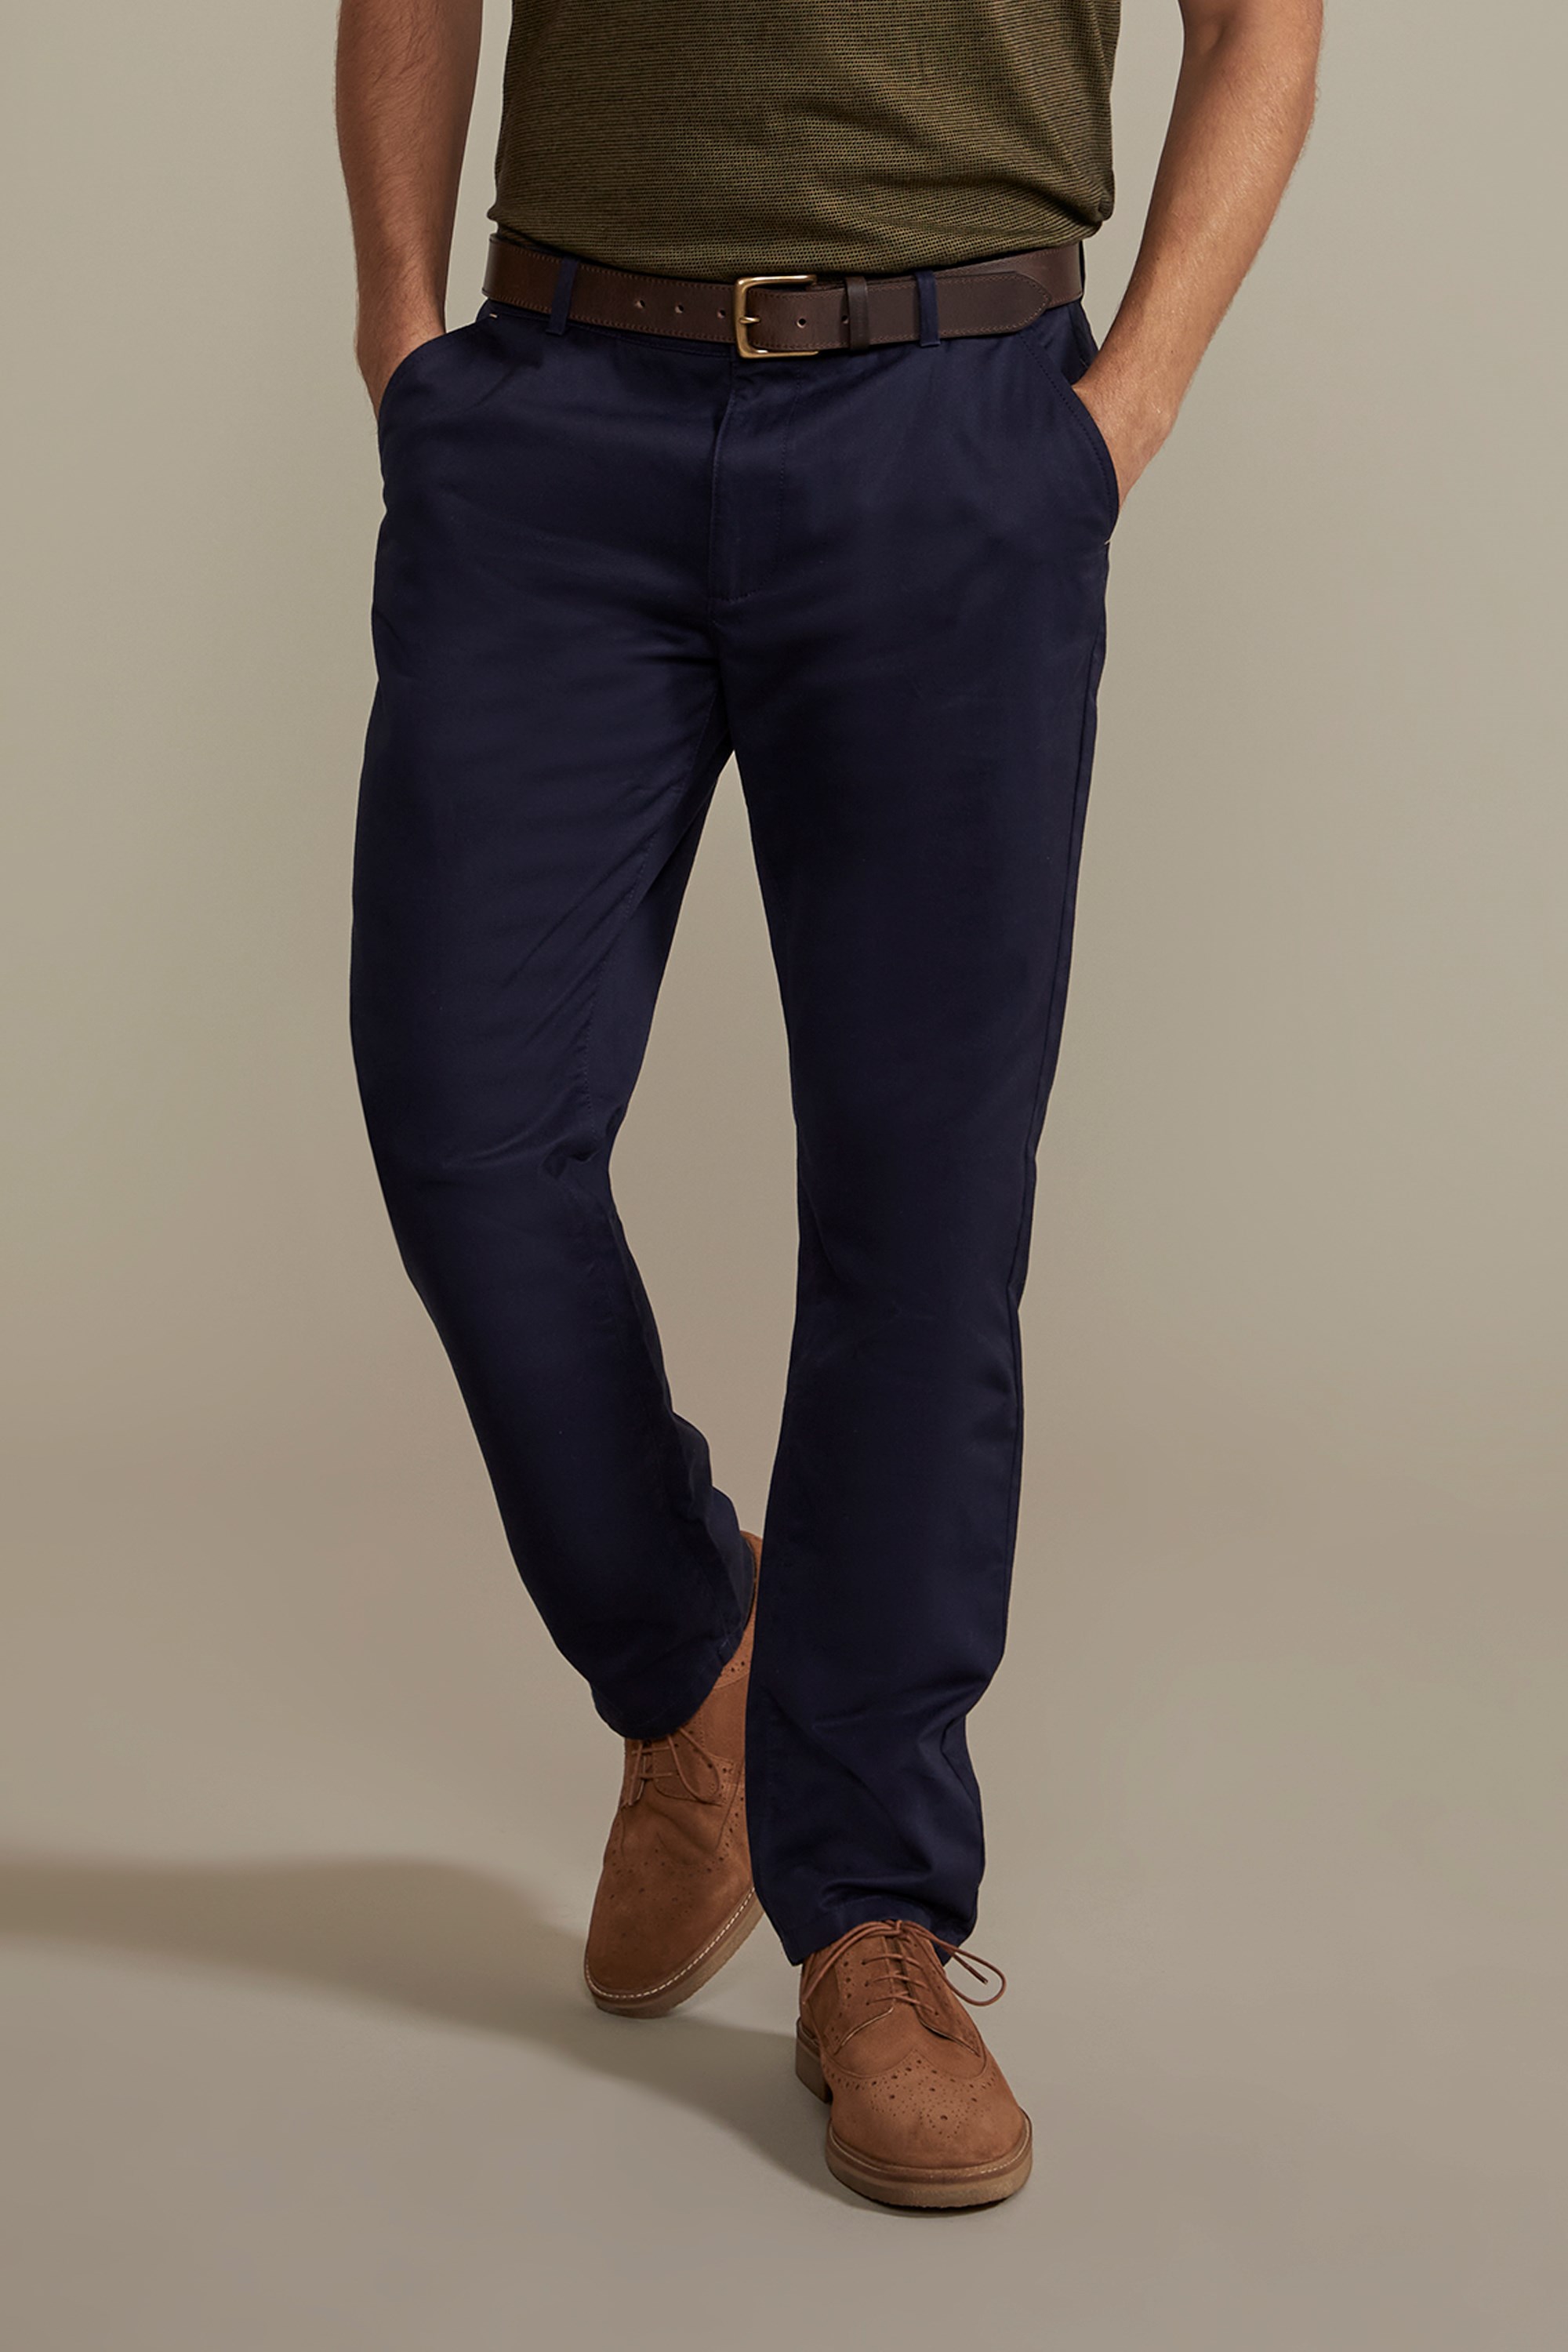 Oban Mens Cotton Chino Trousers - Navy